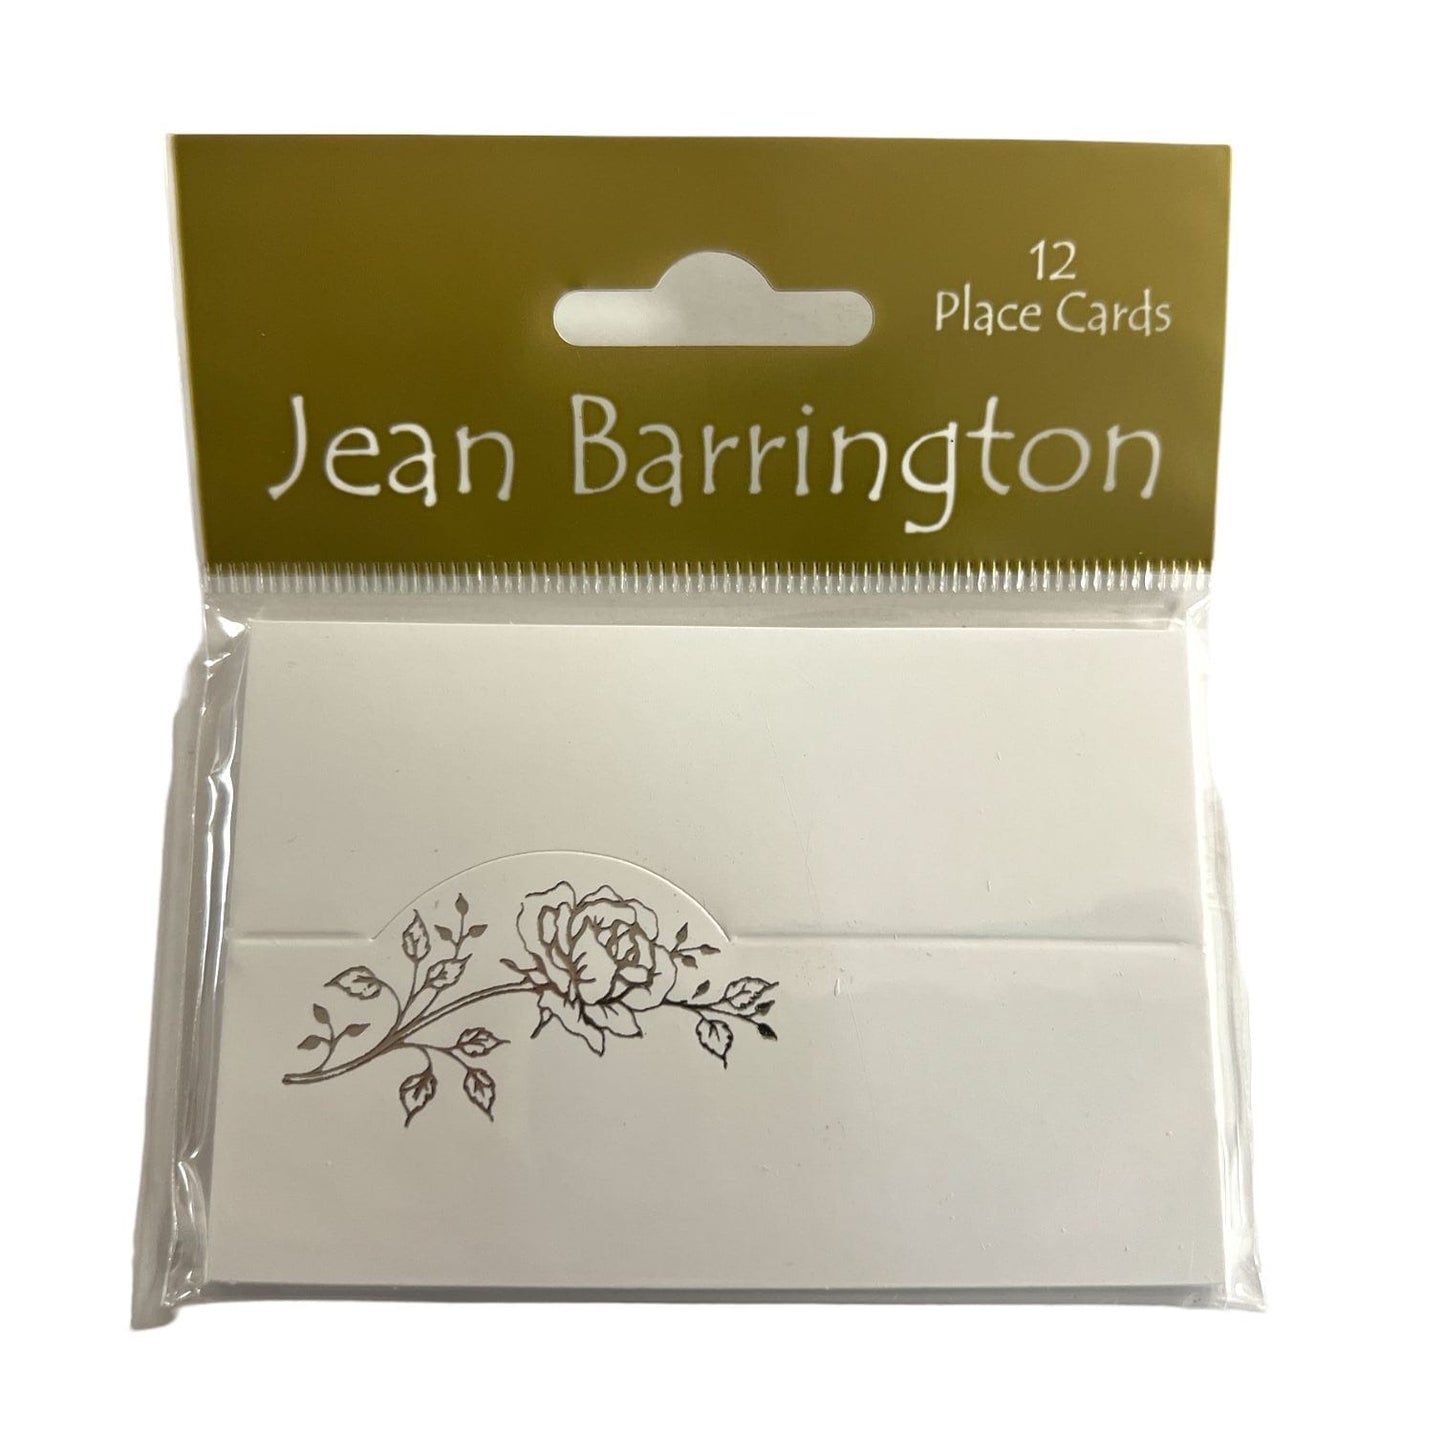 Pack of 12 Place Cards - White with Silver Rose